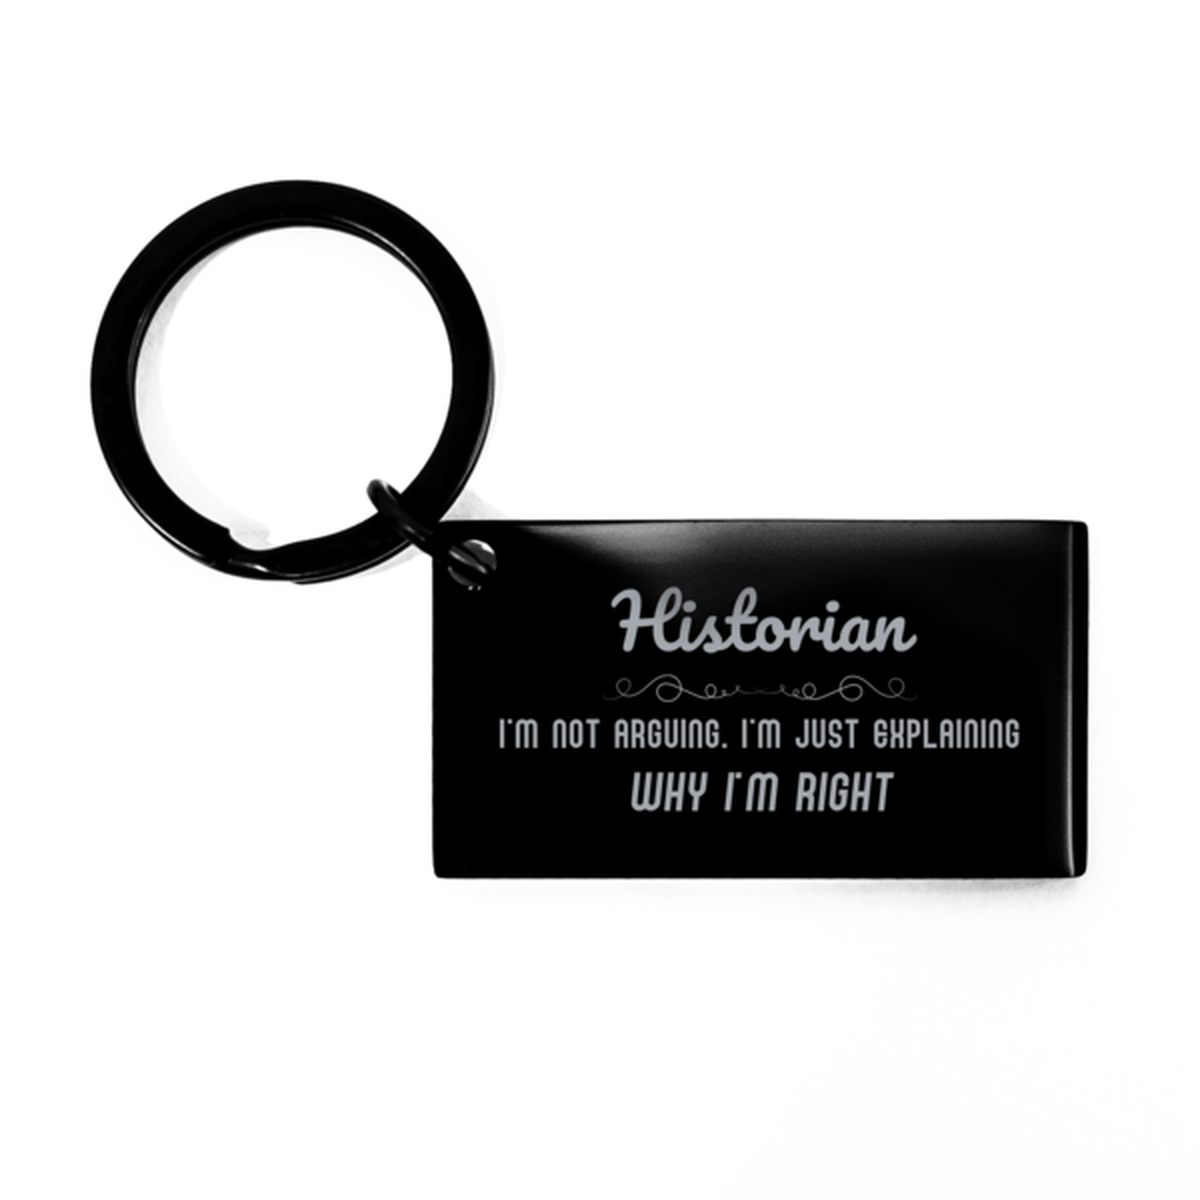 Historian I'm not Arguing. I'm Just Explaining Why I'm RIGHT Keychain, Funny Saying Quote Historian Gifts For Historian Graduation Birthday Christmas Gifts for Men Women Coworker